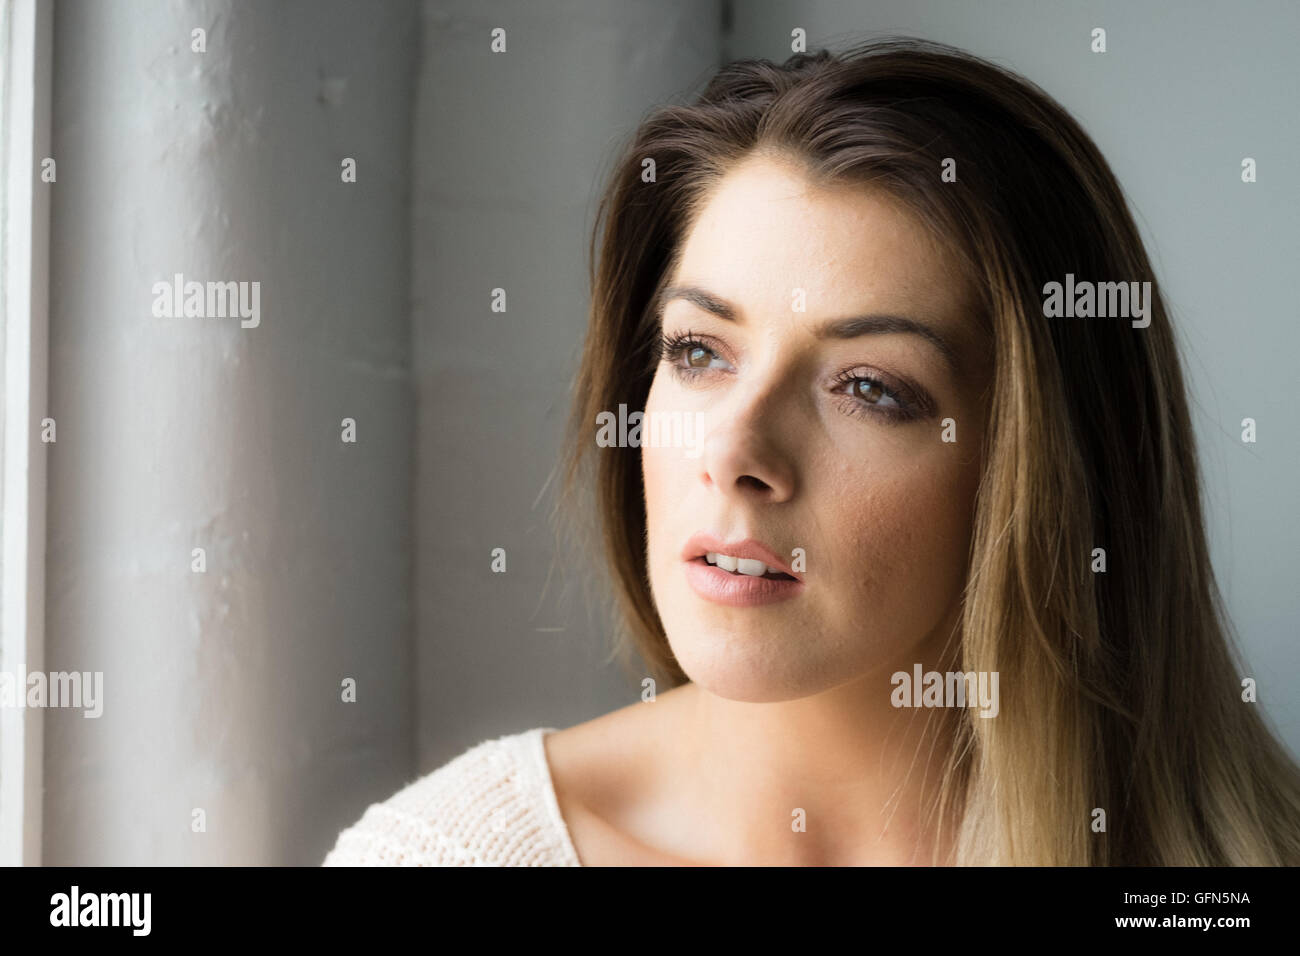 Thoughtful attractive womanin her 20s Stock Photo